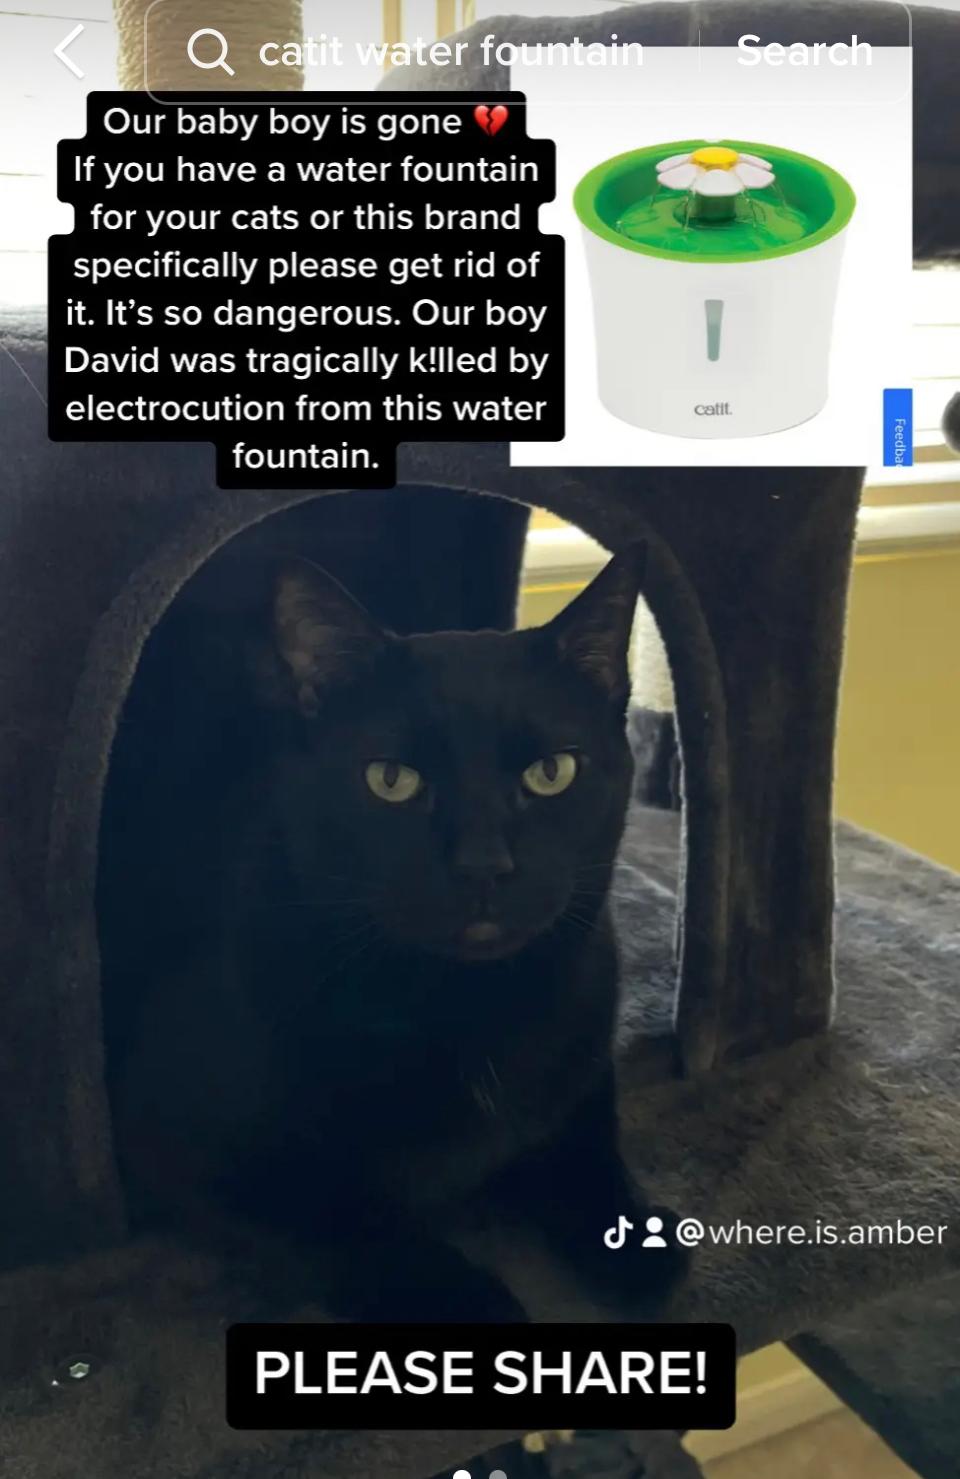 Amber on TikTok spreads awareness about cat water fountains